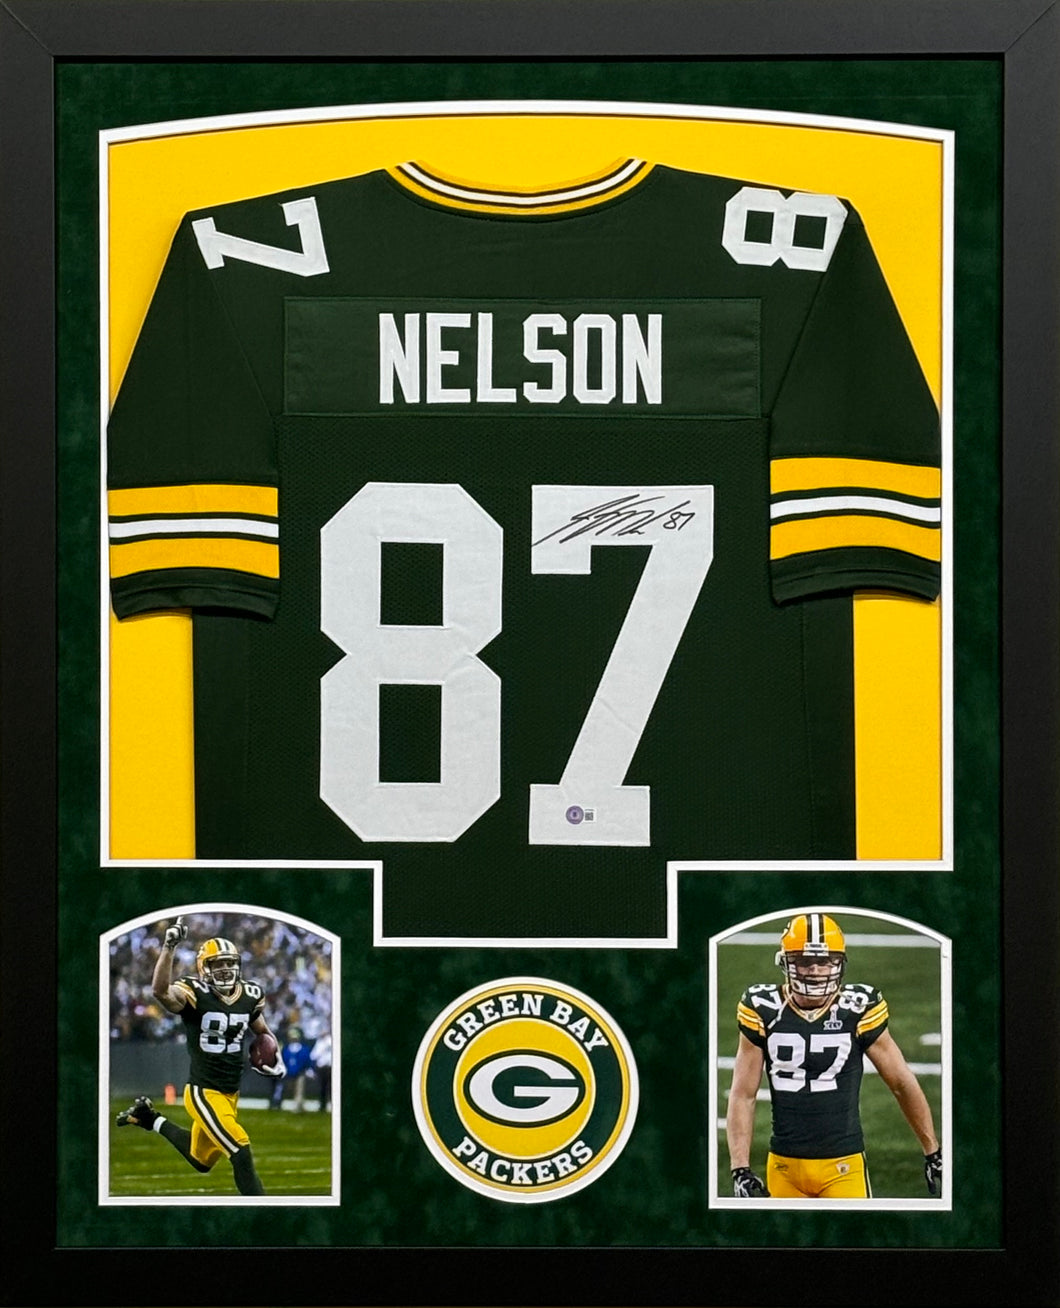 Green Bay Packers Jordy Nelson Signed Green Jersey Framed & Suede Matted with BECKETT COA